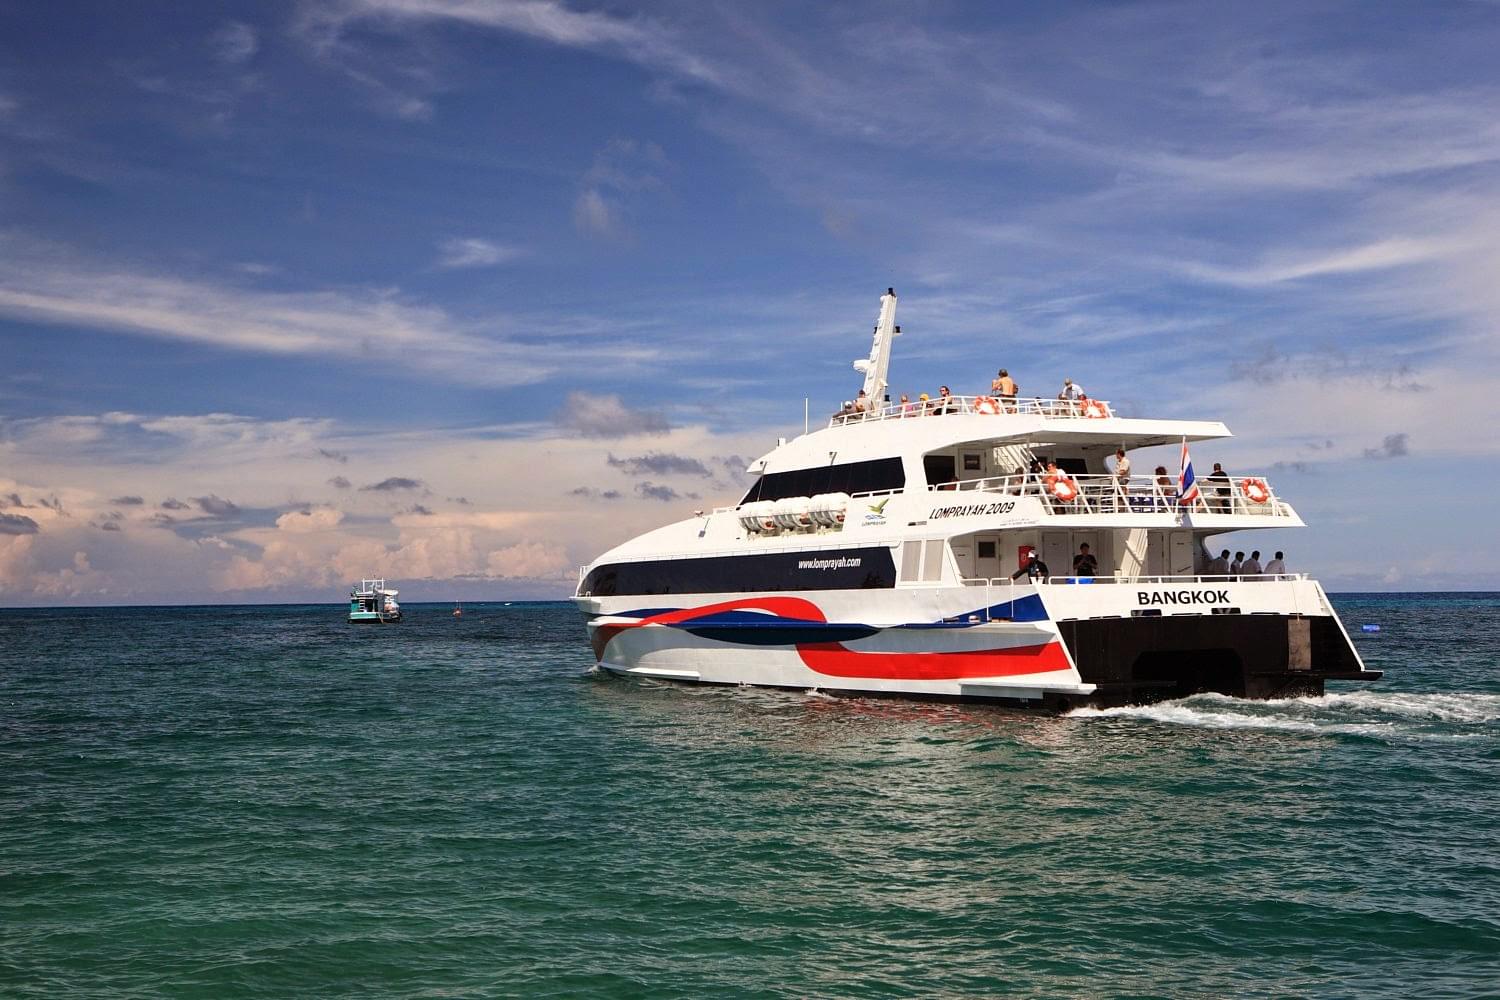 Experience a comfortable one-way ferry ride from Bangkok to Koh Tao